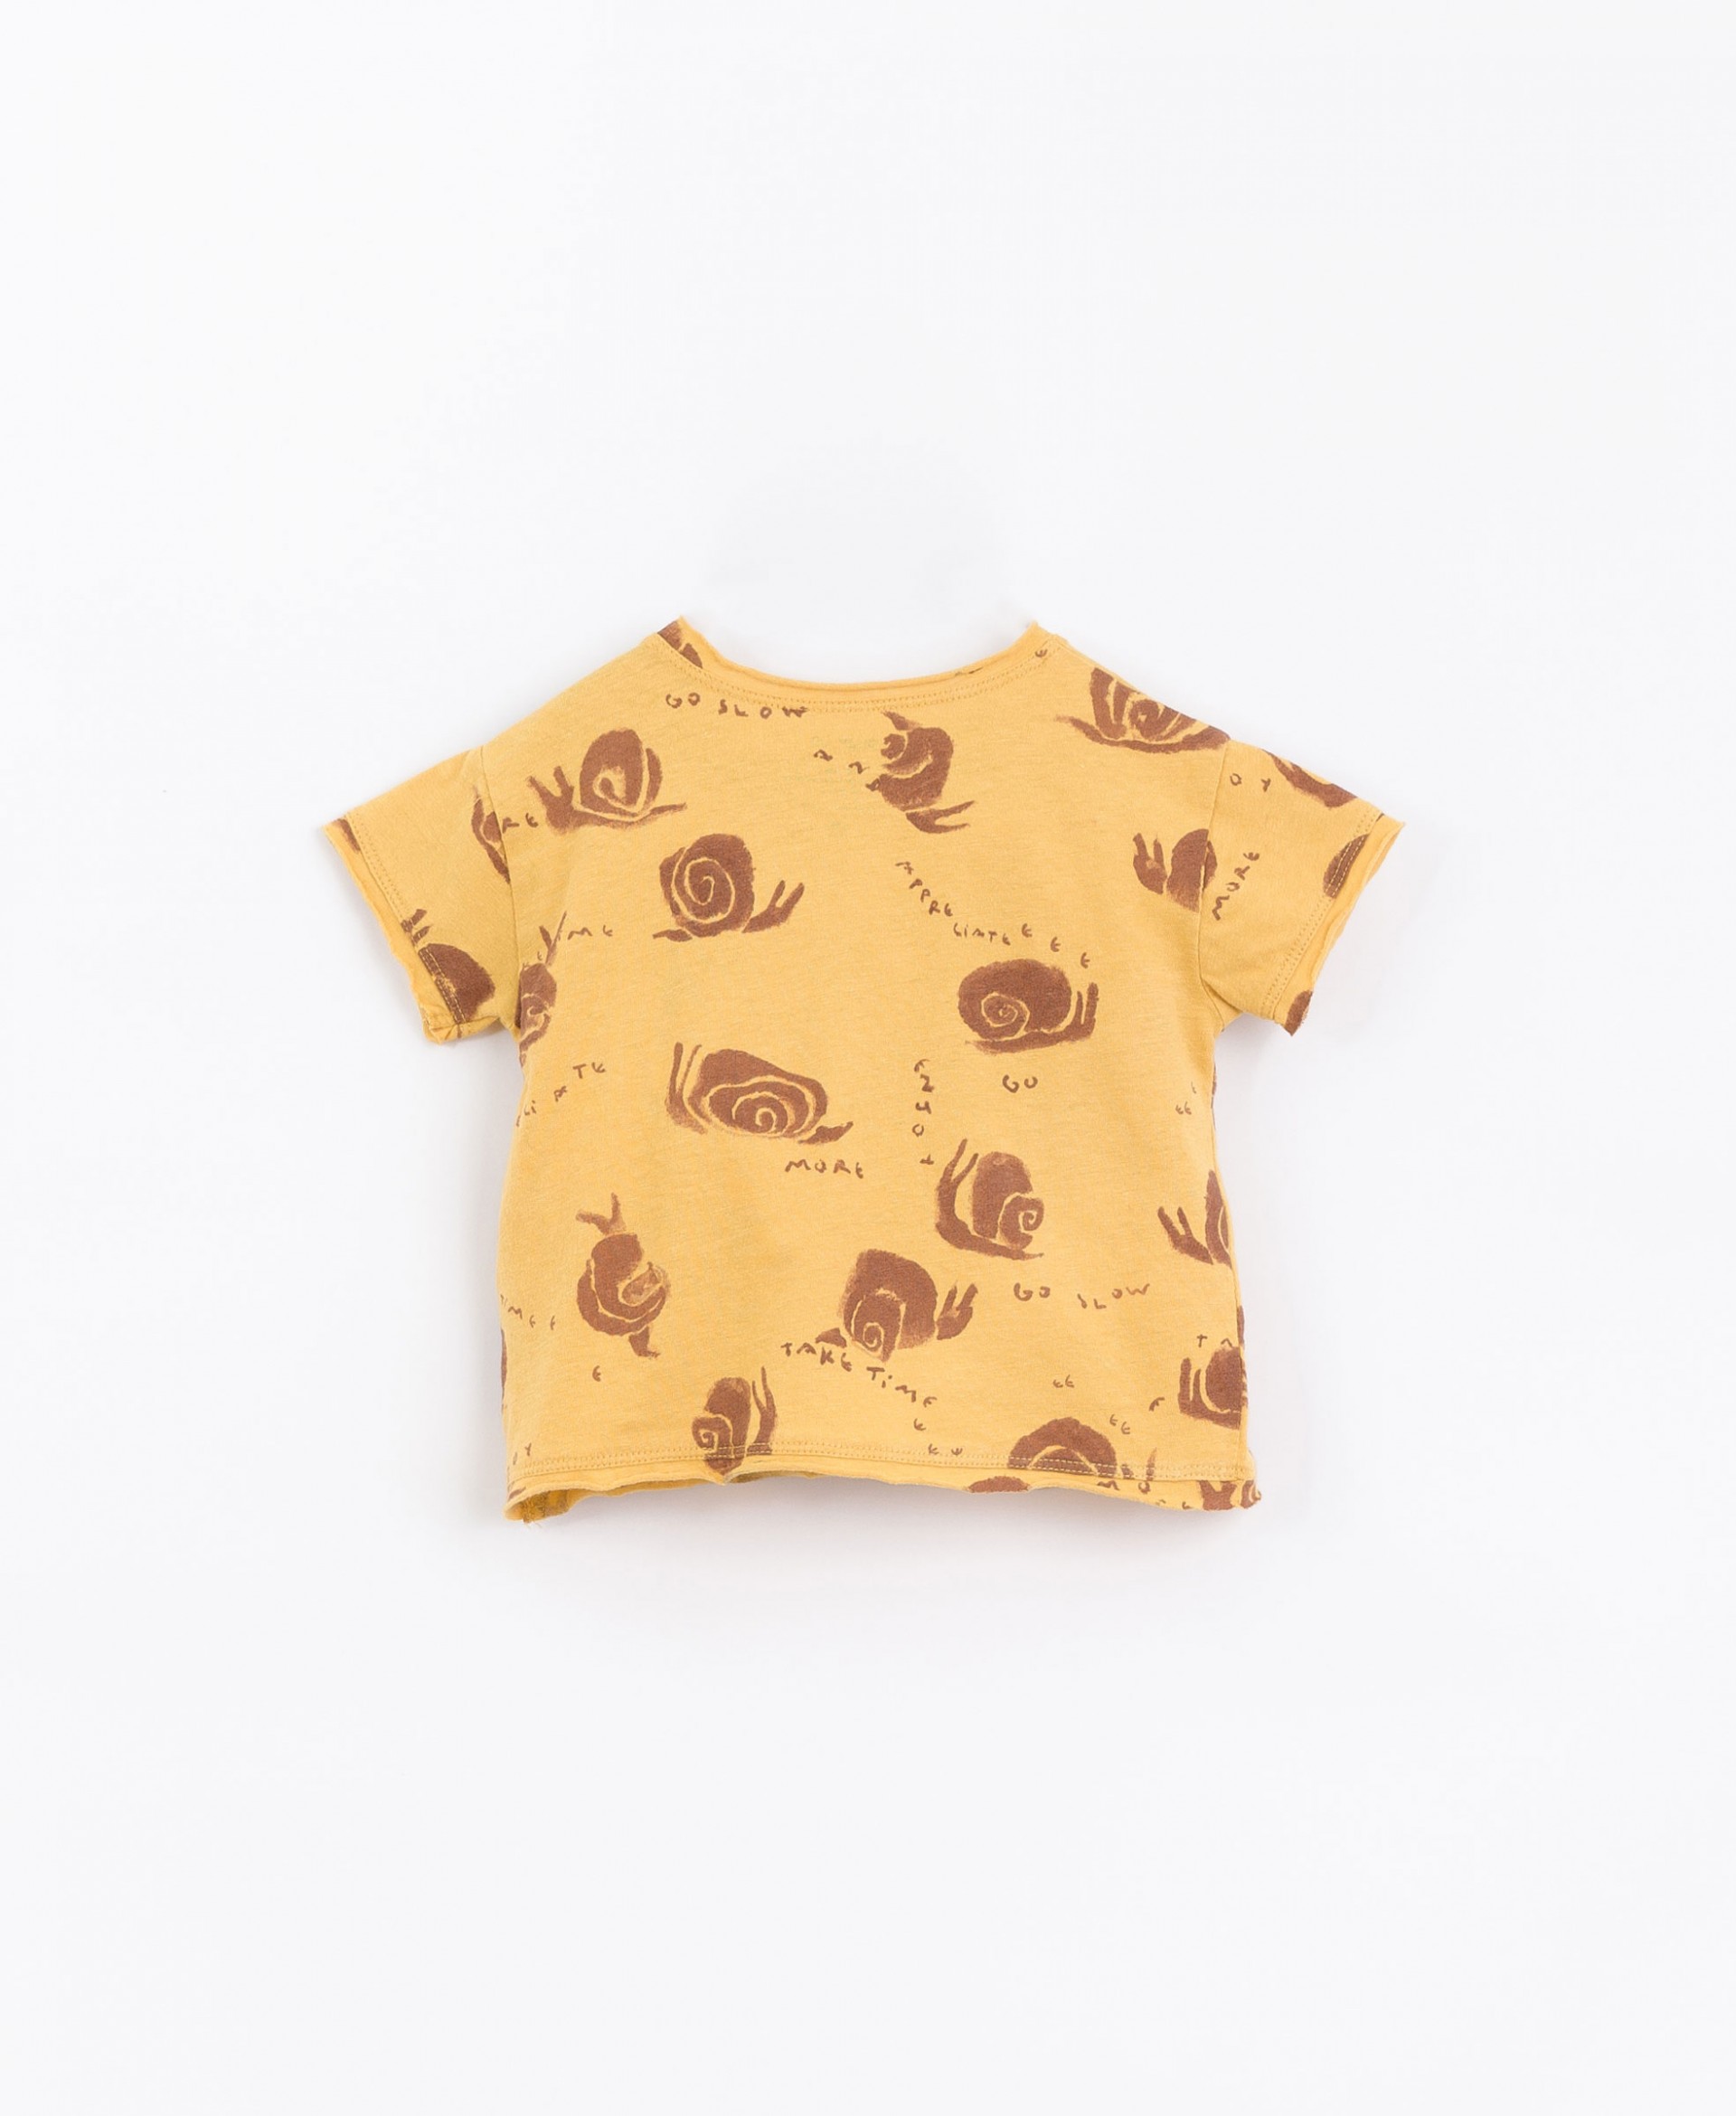 T-shirt in jersey with snail print | Basketry